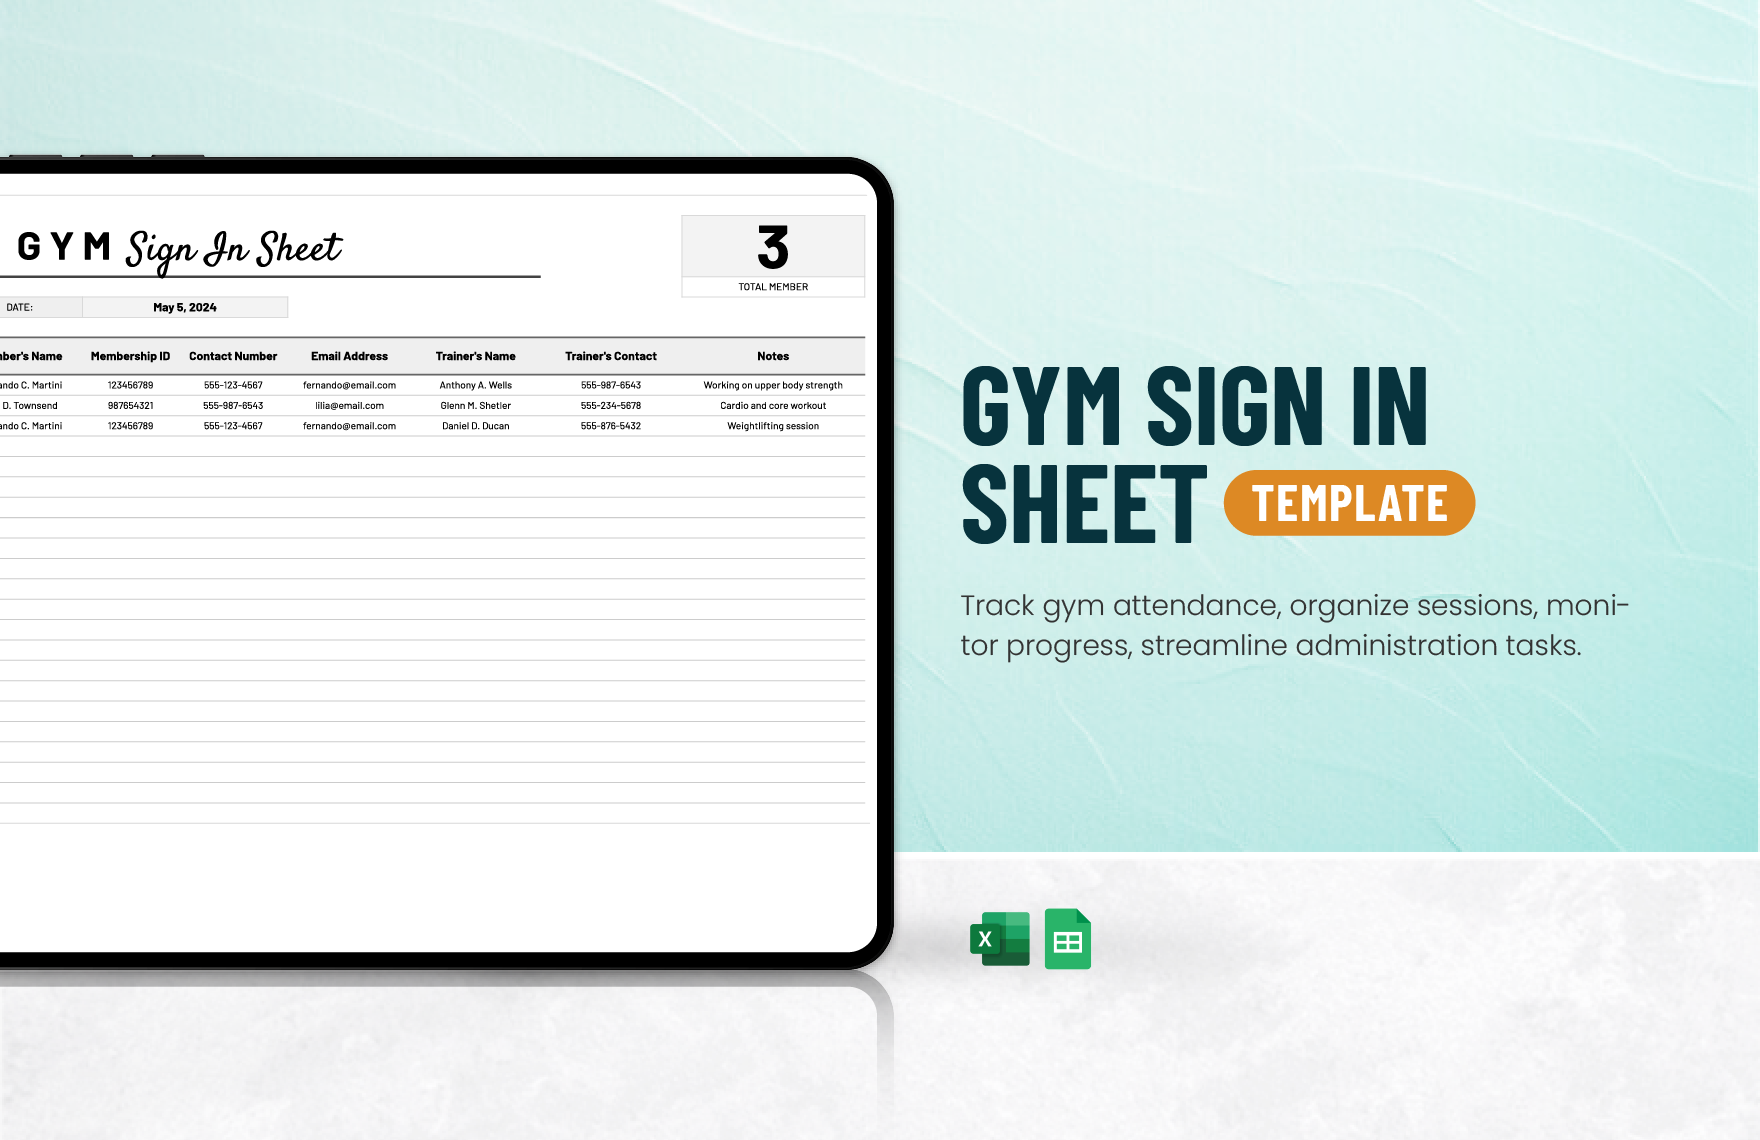 Gym Sign in Sheet Template in Excel, Google Sheets